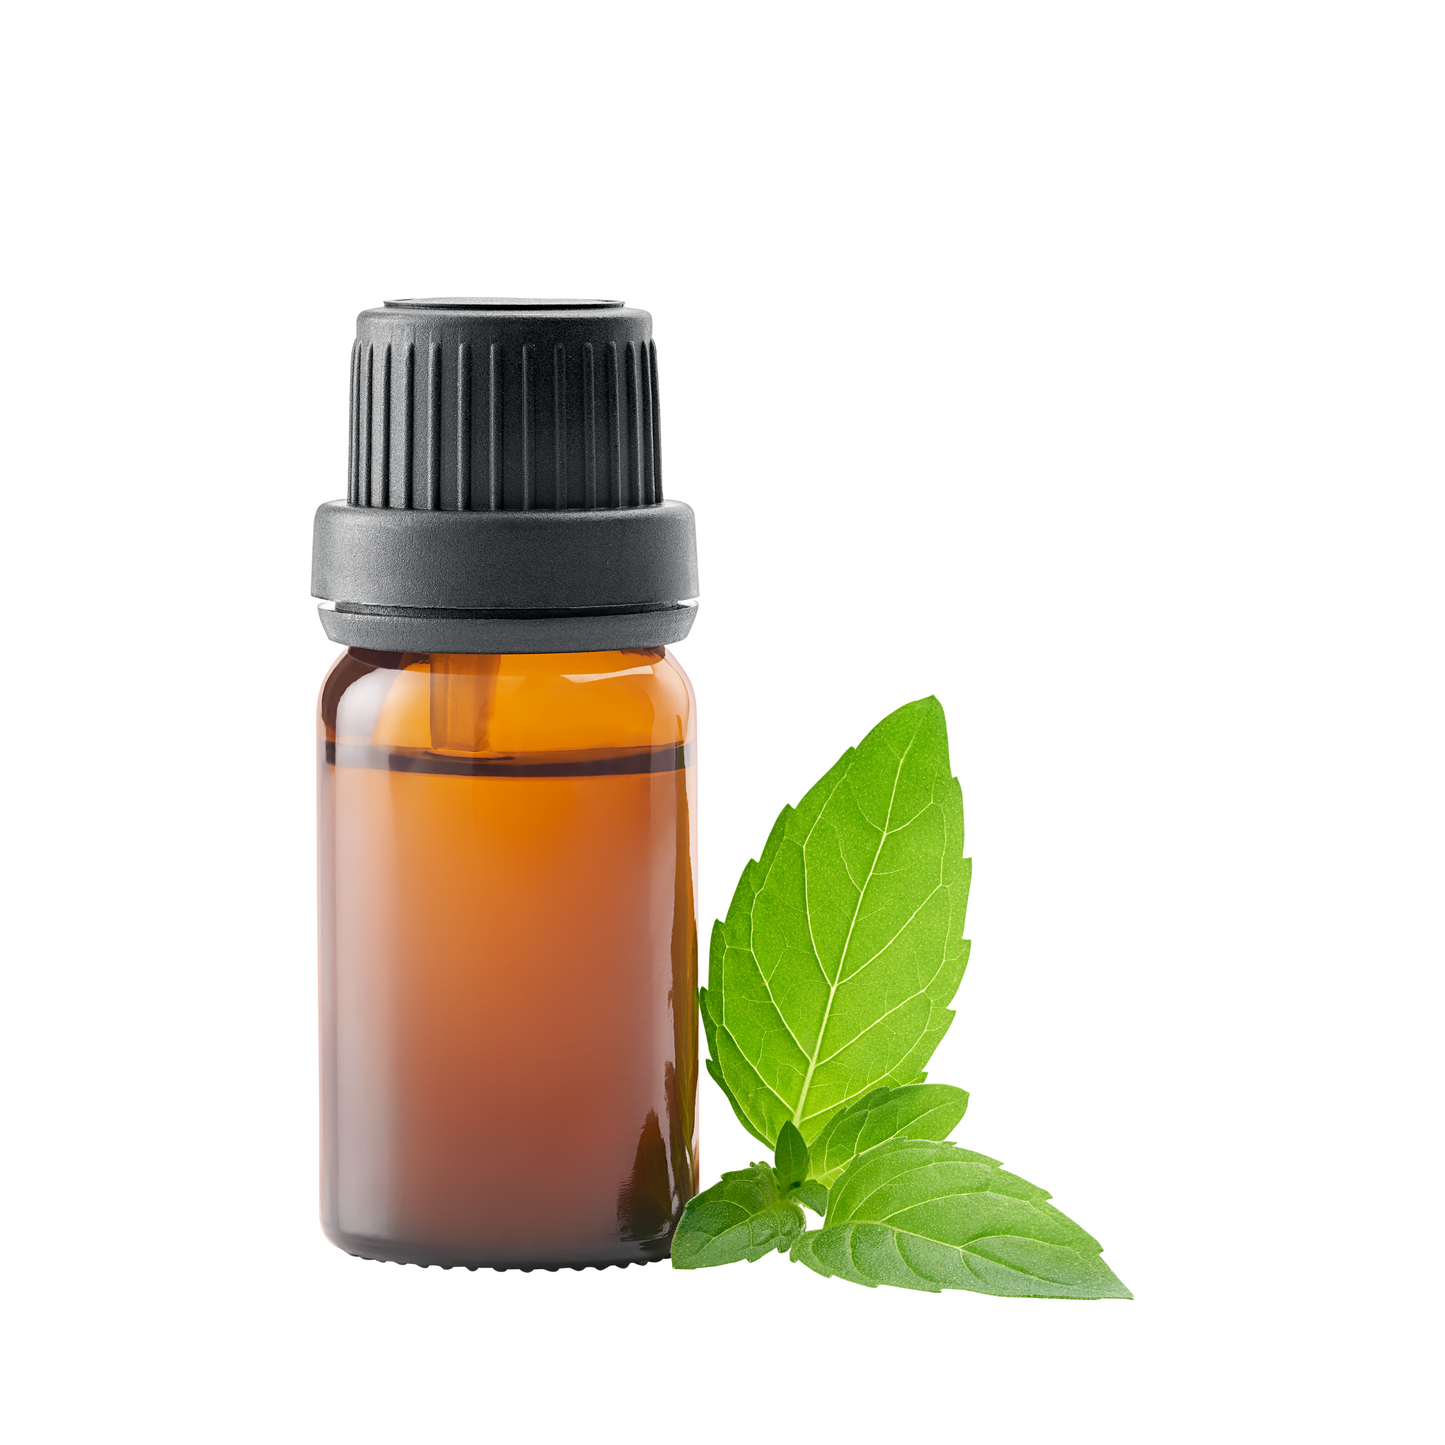 Peppermint Liquid Extract Oil Soluble